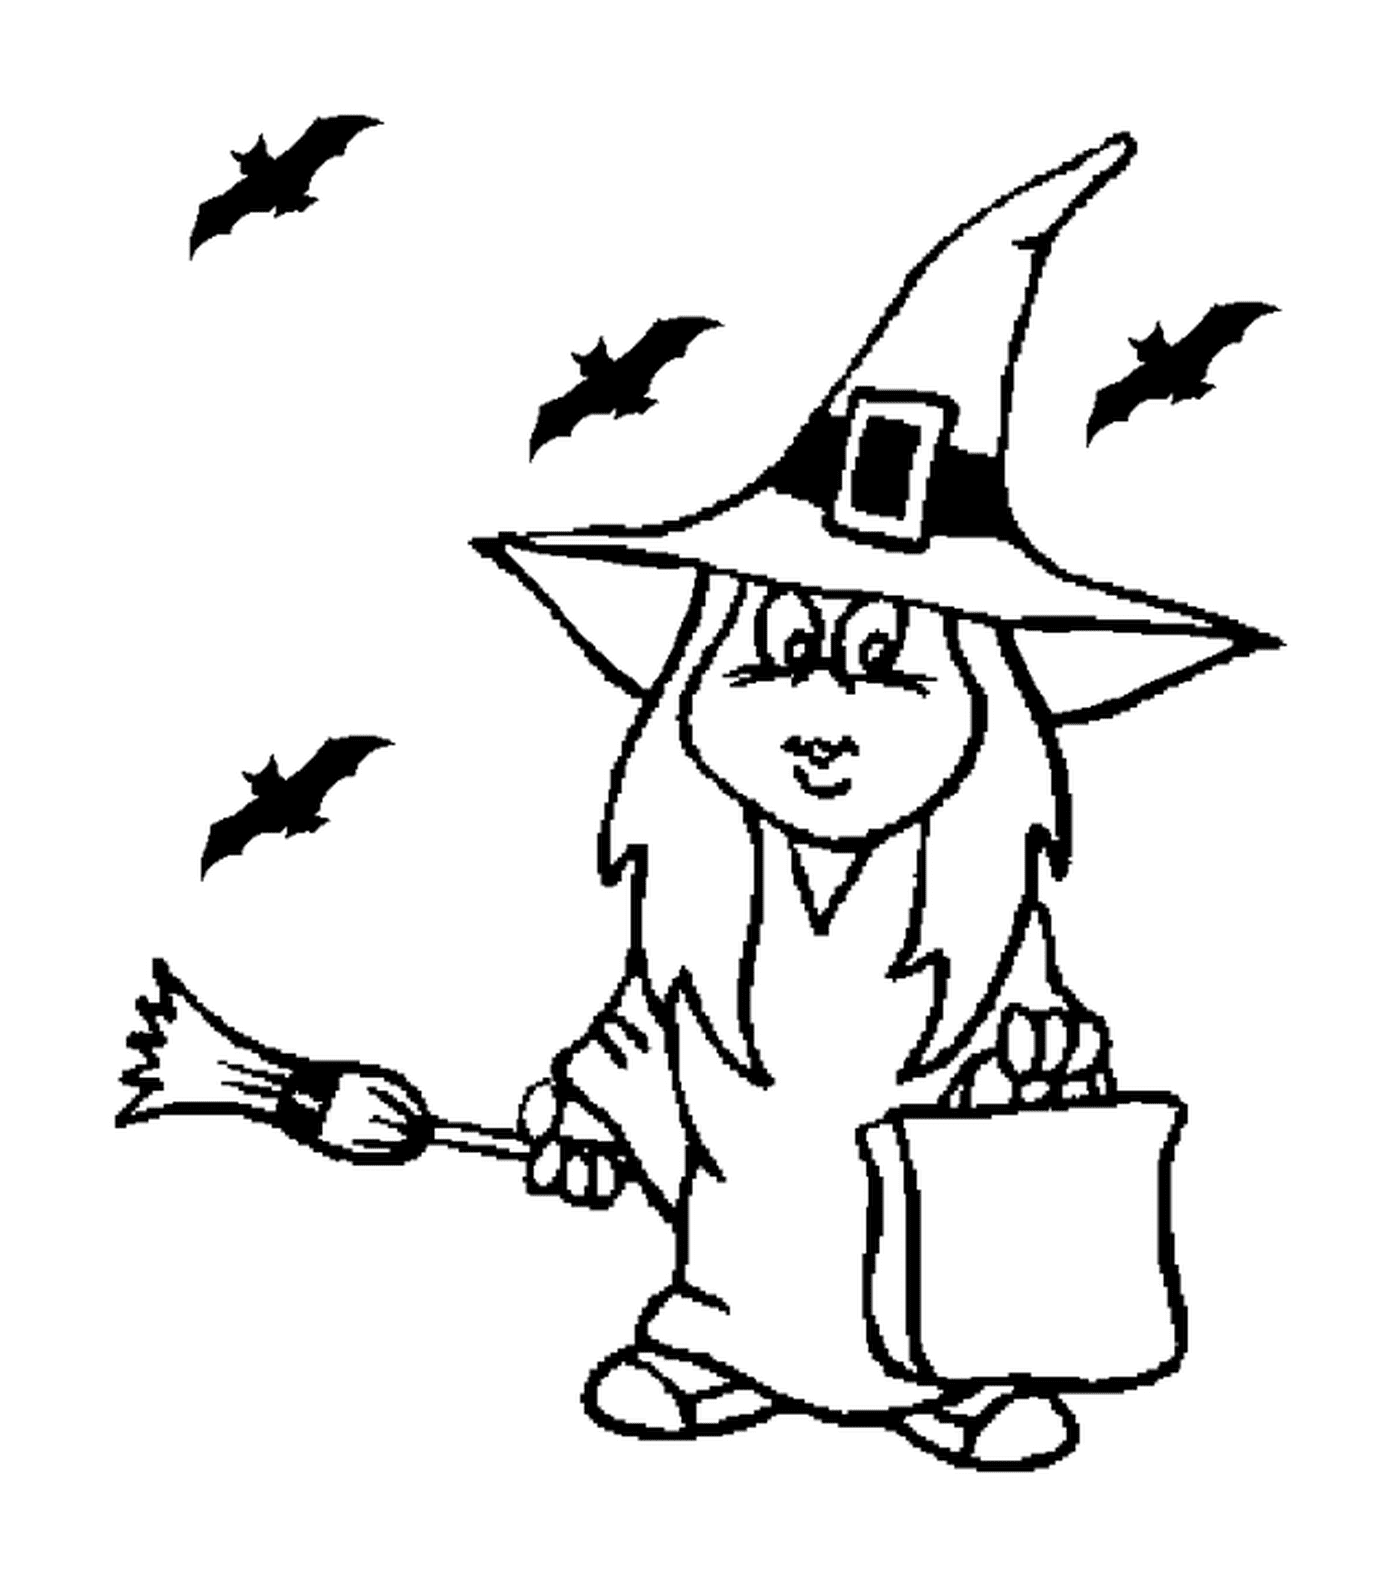  witch holding a broom 